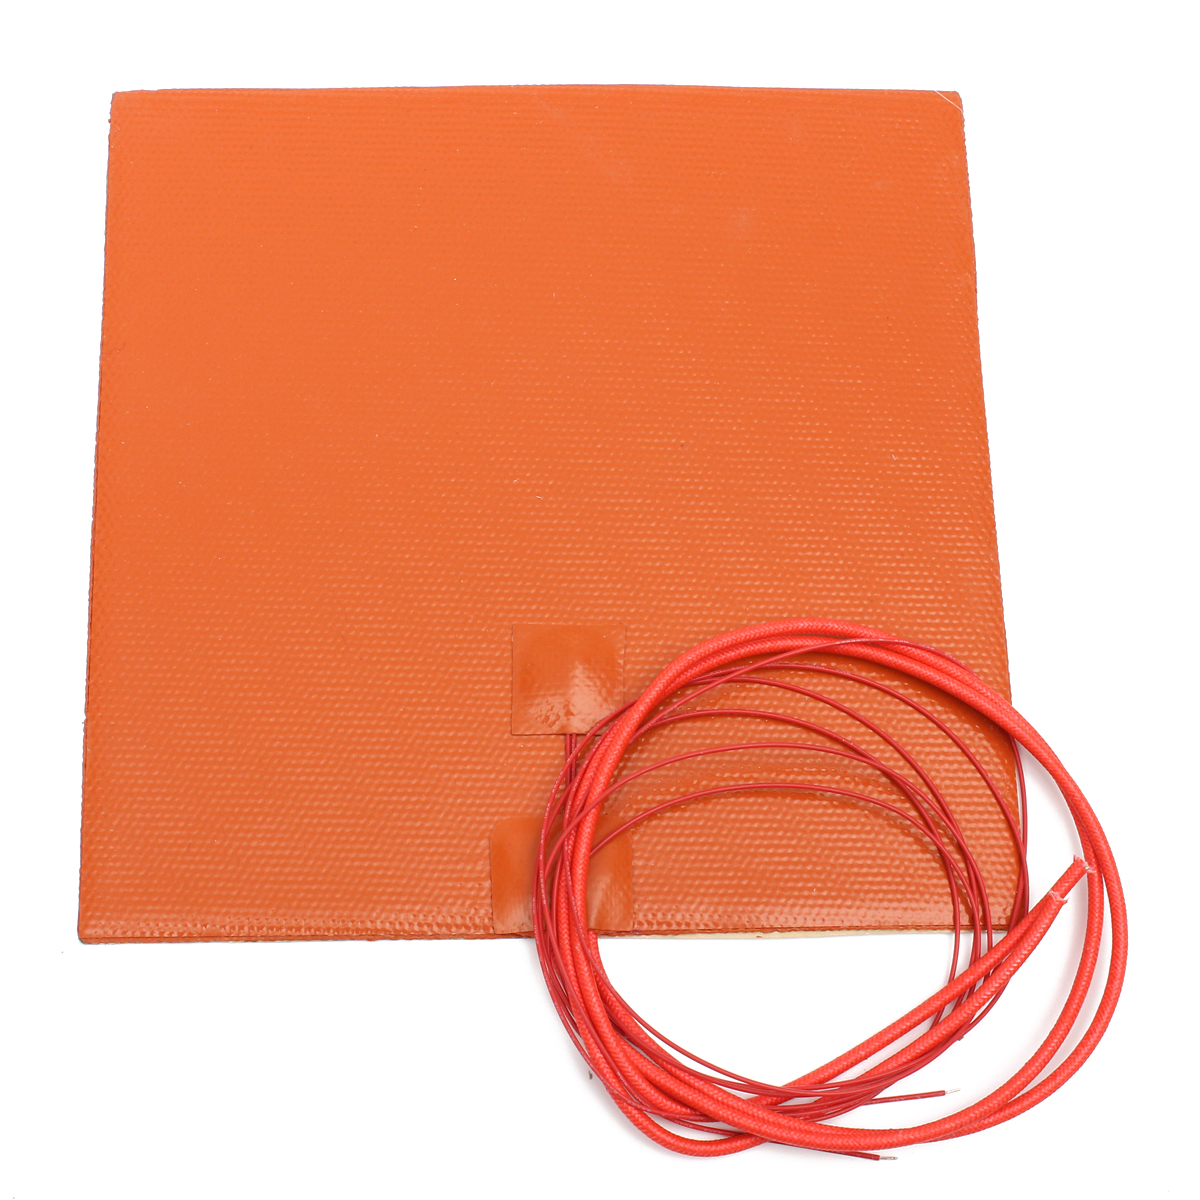 12V 200W 200mmx200mm Waterproof Flexible Silicone Heating Pad Heater For 3d Printer Heat Bed 9